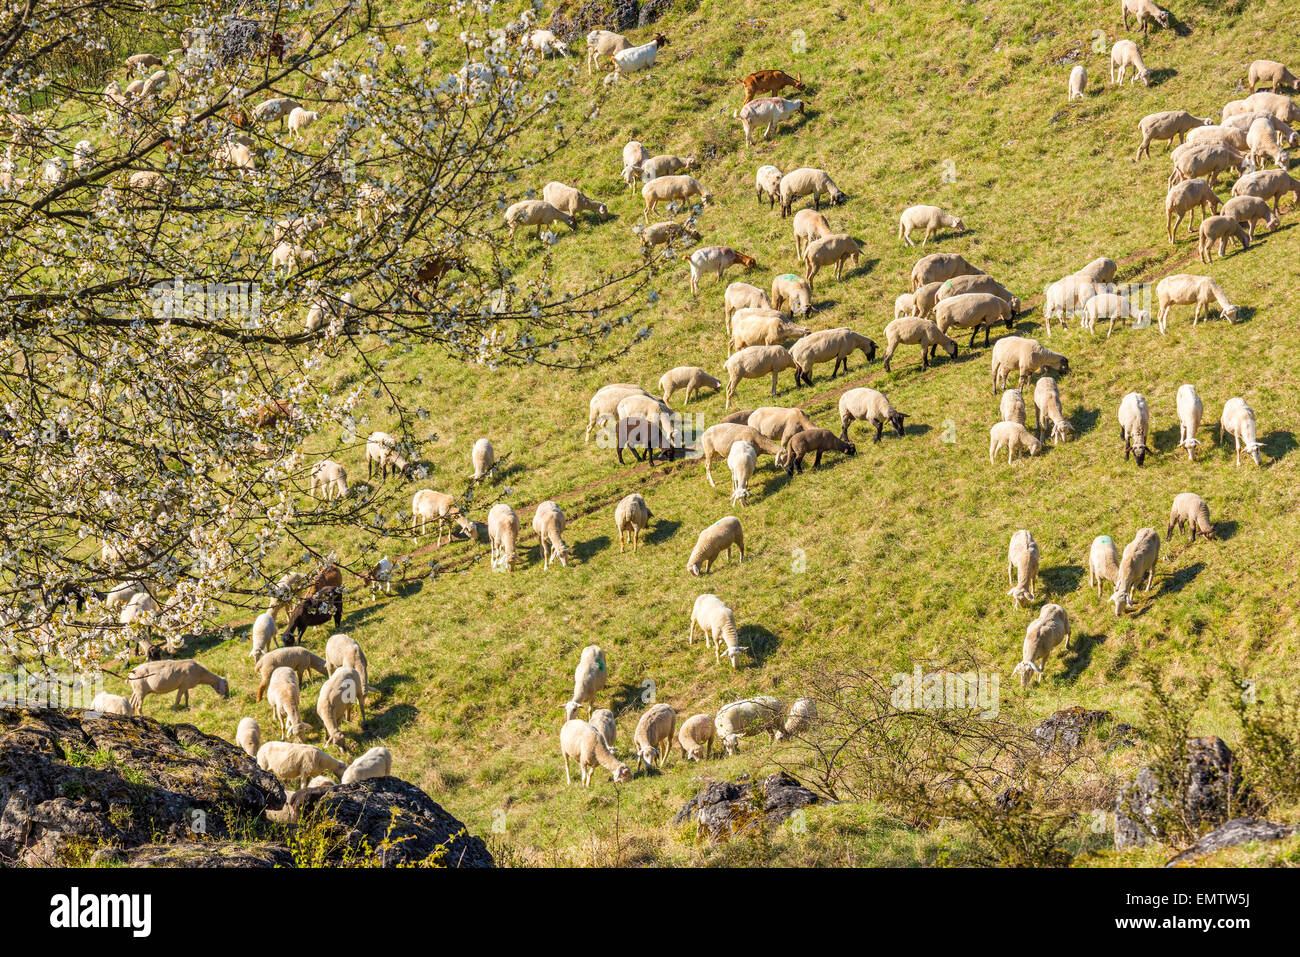 Sheep lambs, goats in the spring they graze on the hillside, juradistl lamb bavaria europe Germany natural nature healthy best m Stock Photo